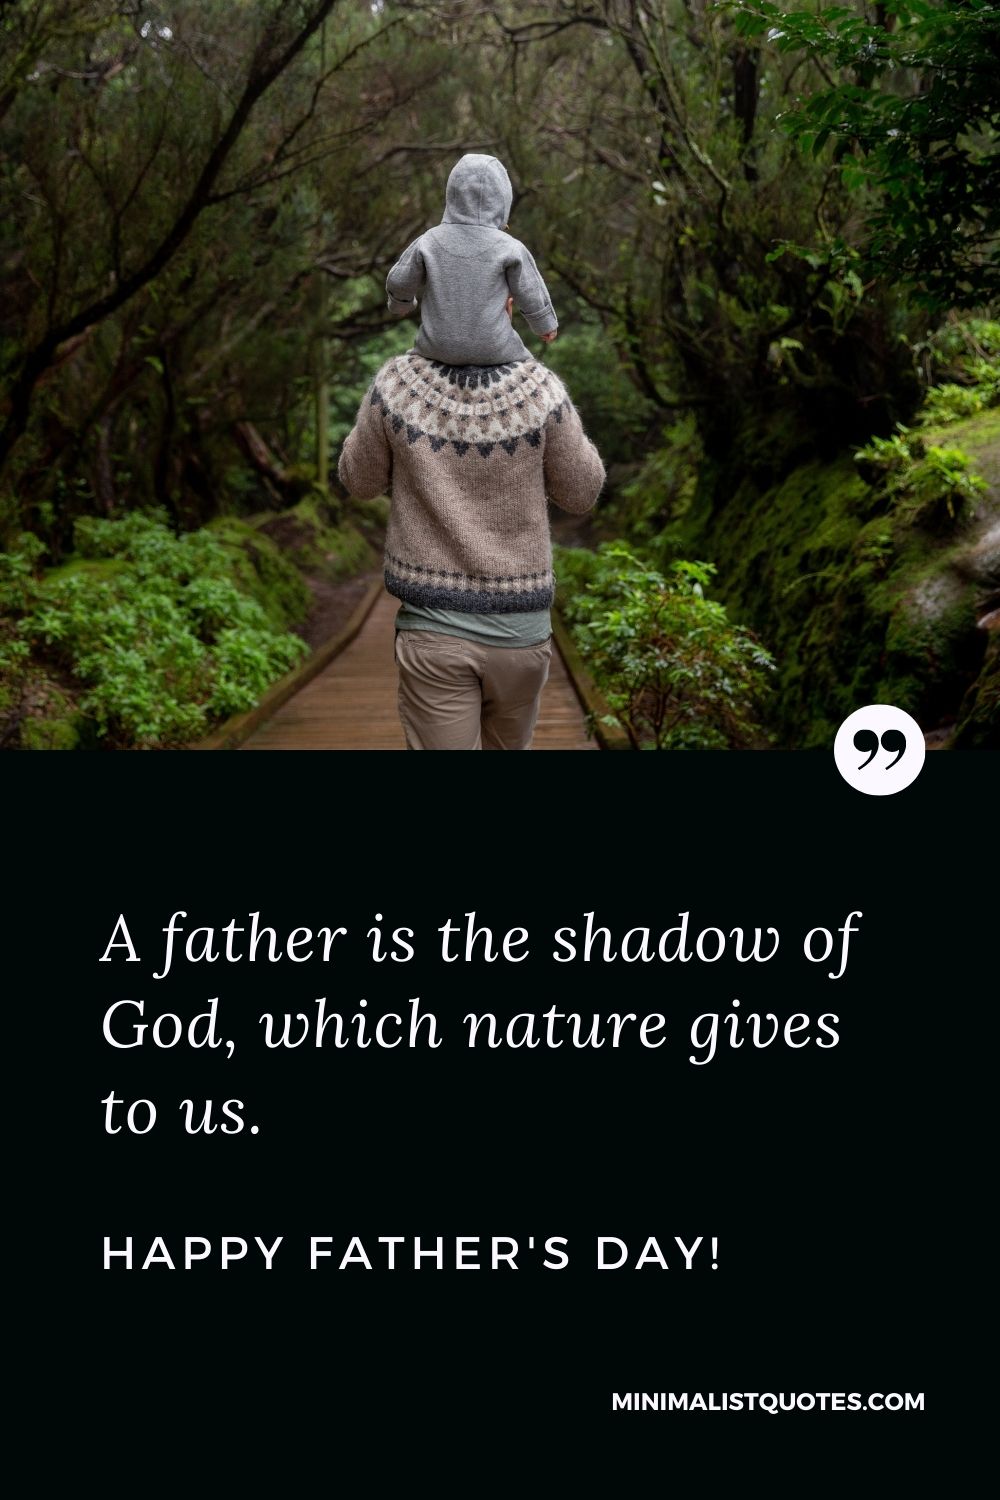 Fathers Day Quote, Wish & Message With Image; A father is the shadow of God, which nature gives to us. Happy Fathers Day!